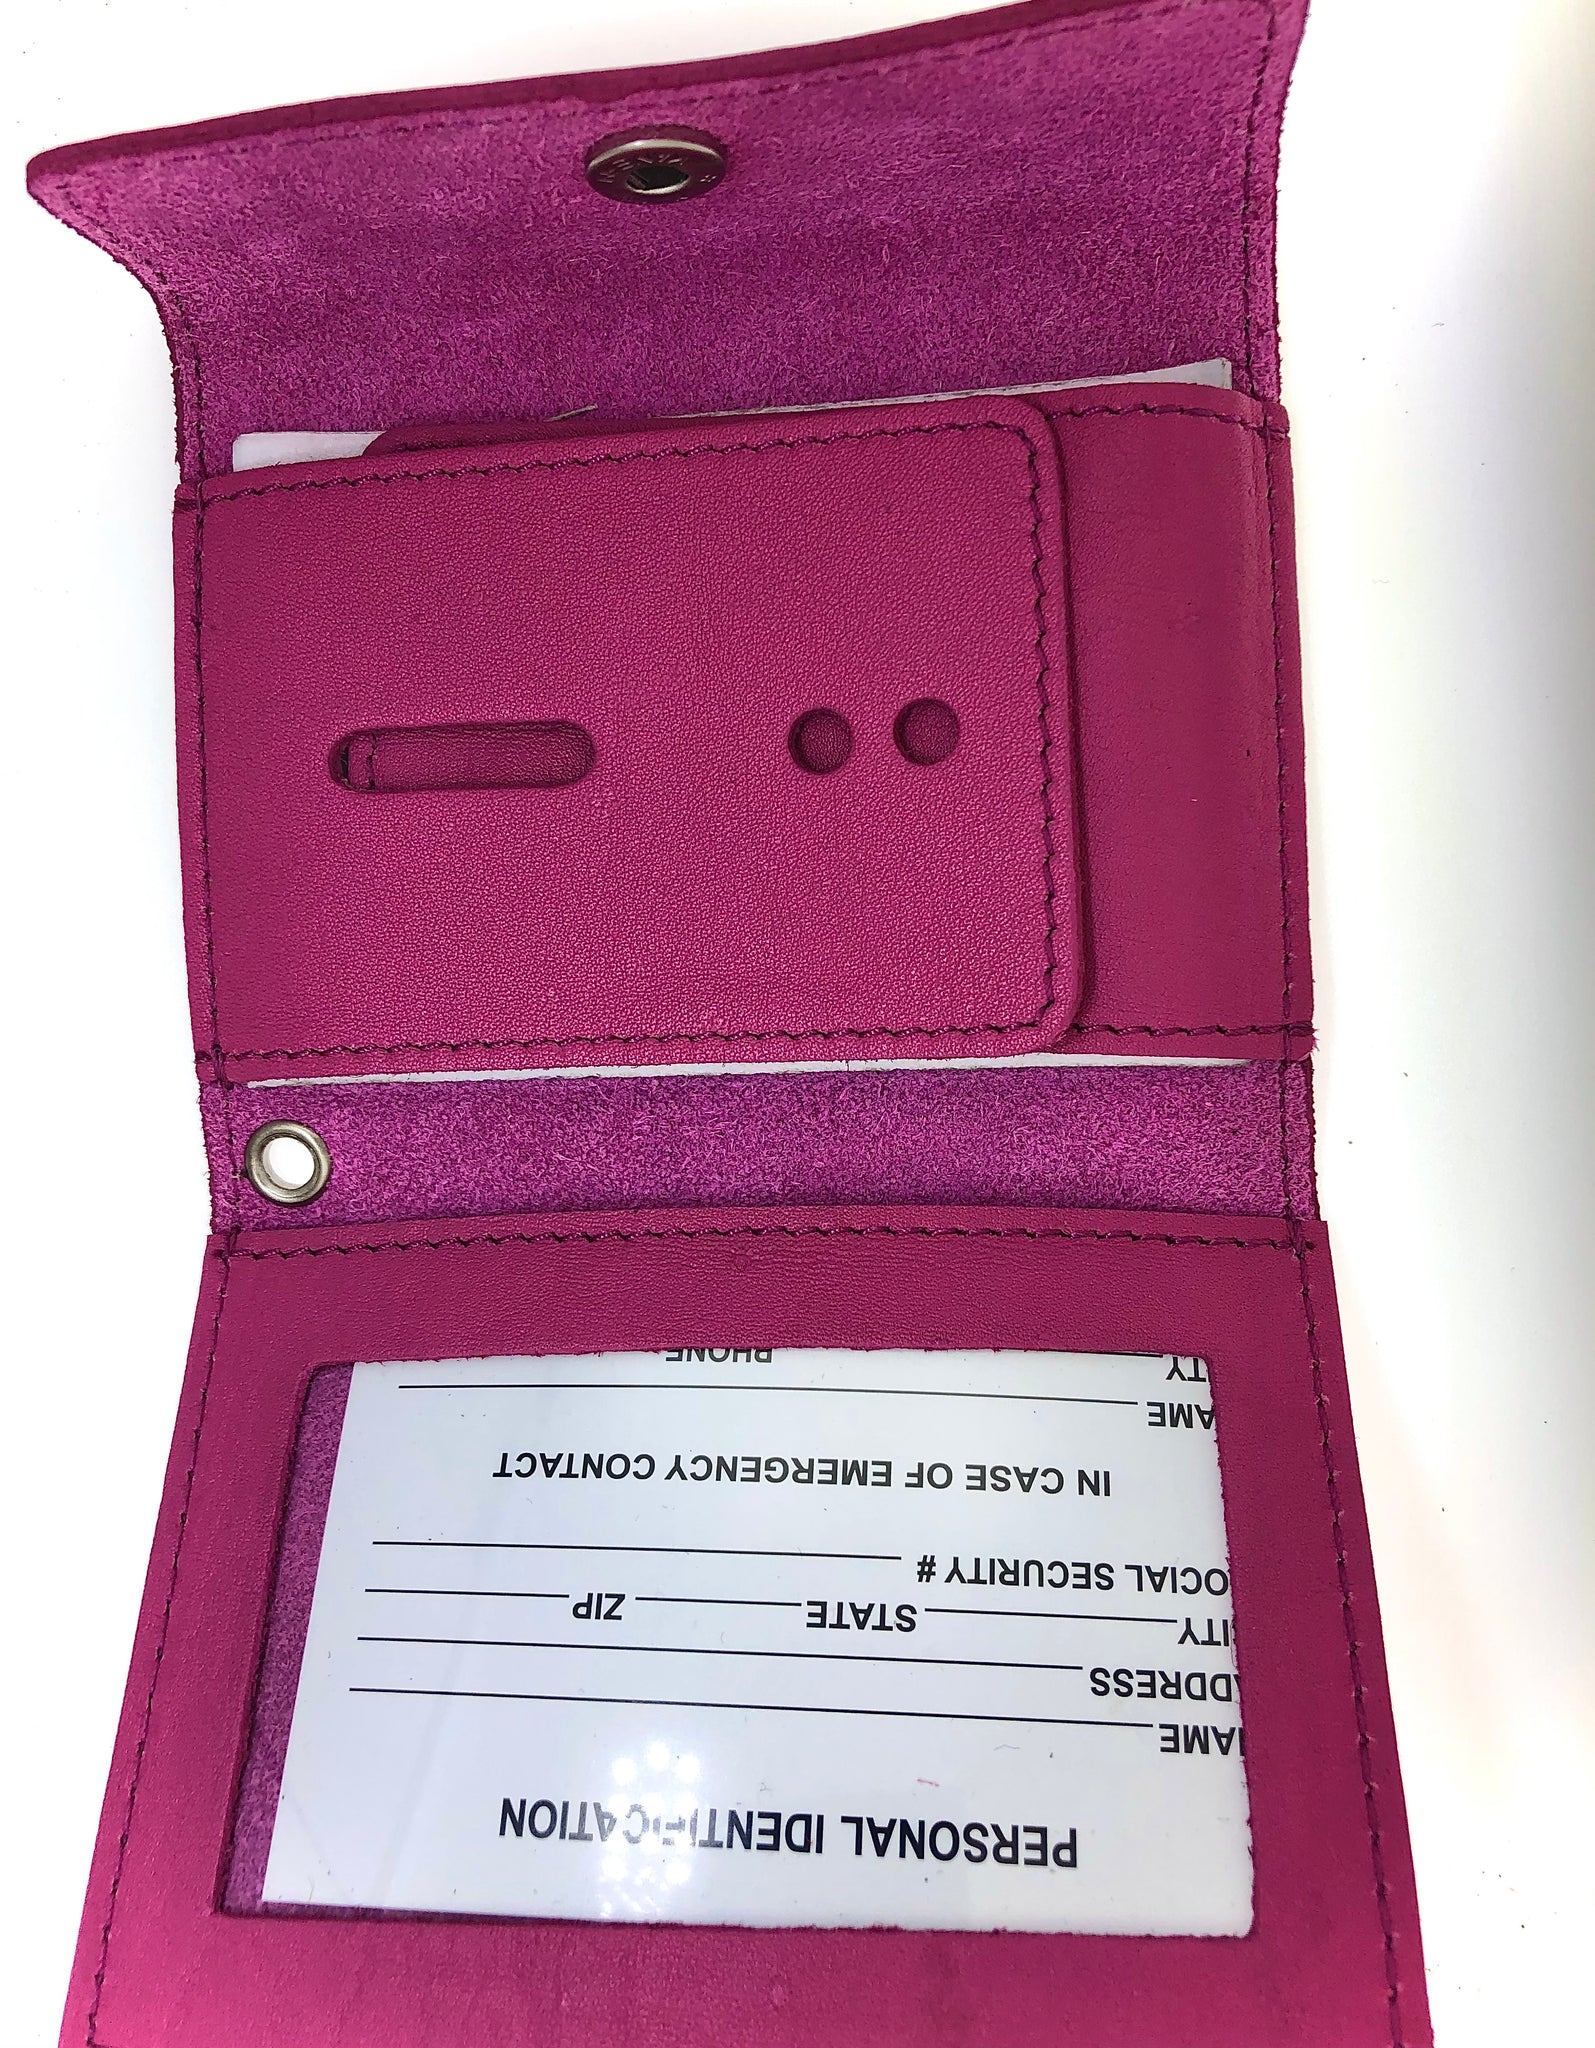 Pink Leather Universal Badge & ID Case